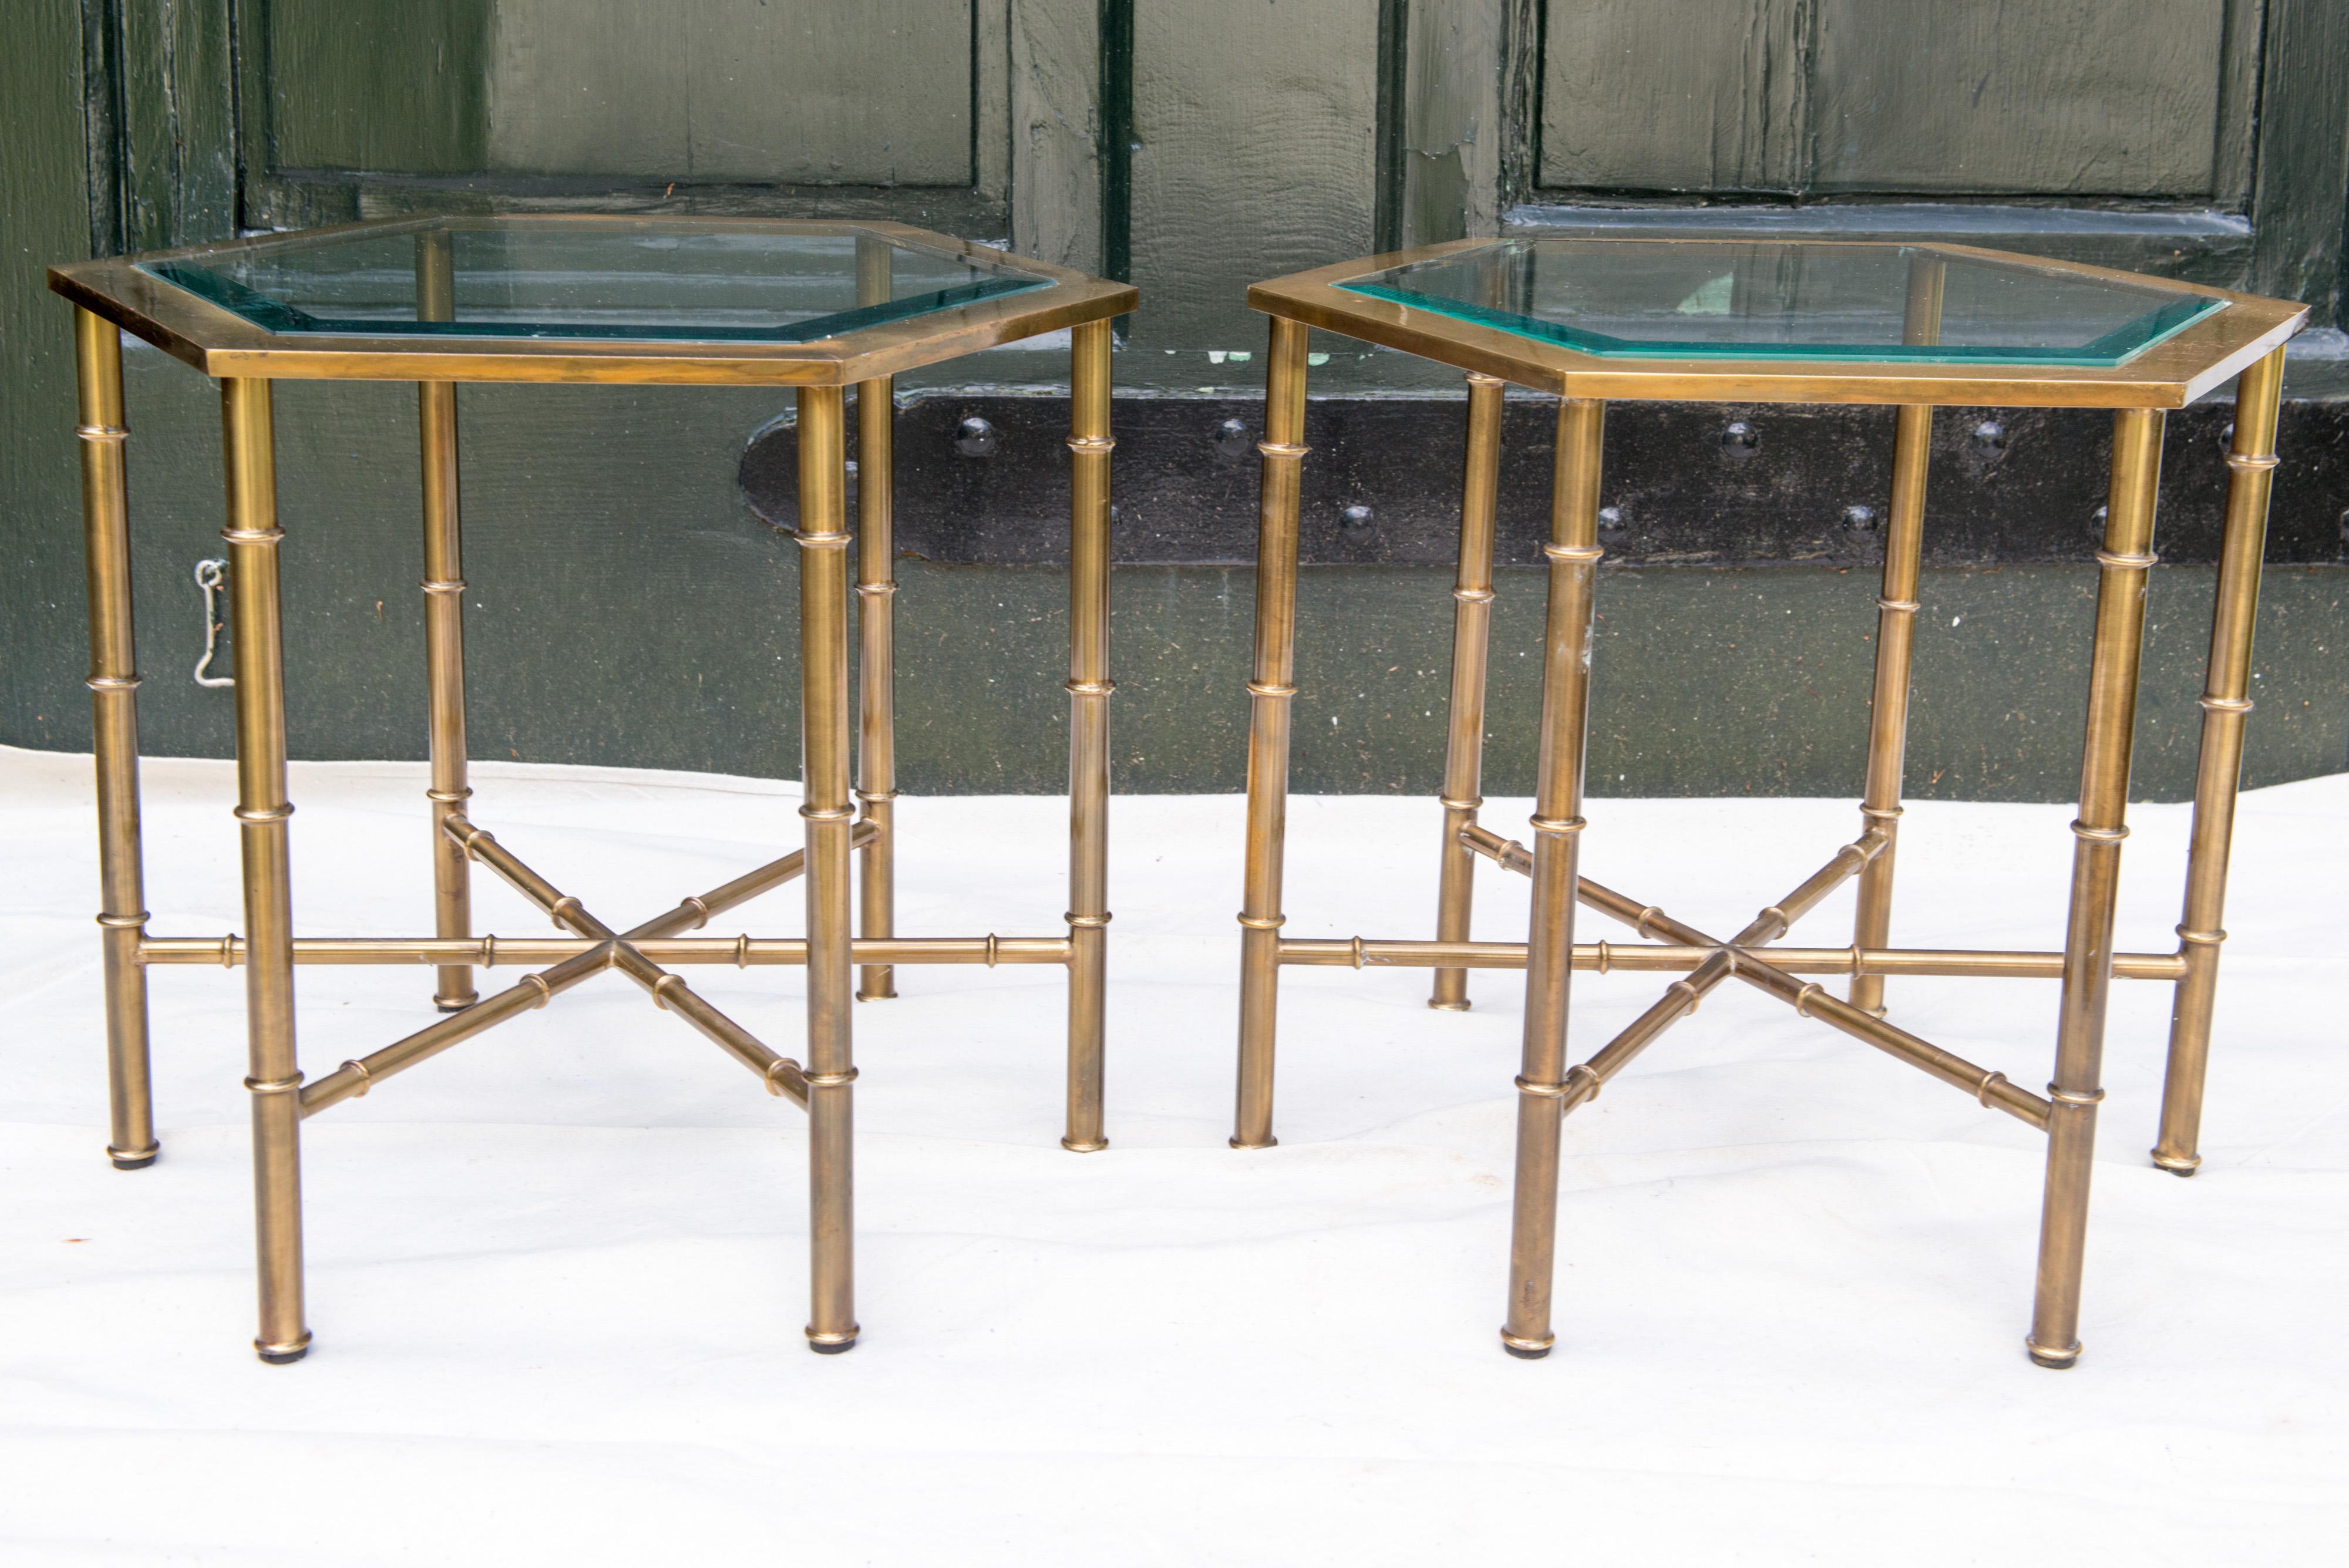 Pair of solid brass faux bamboo hexagonal glass top side tables by Mastercraft, 1970s.